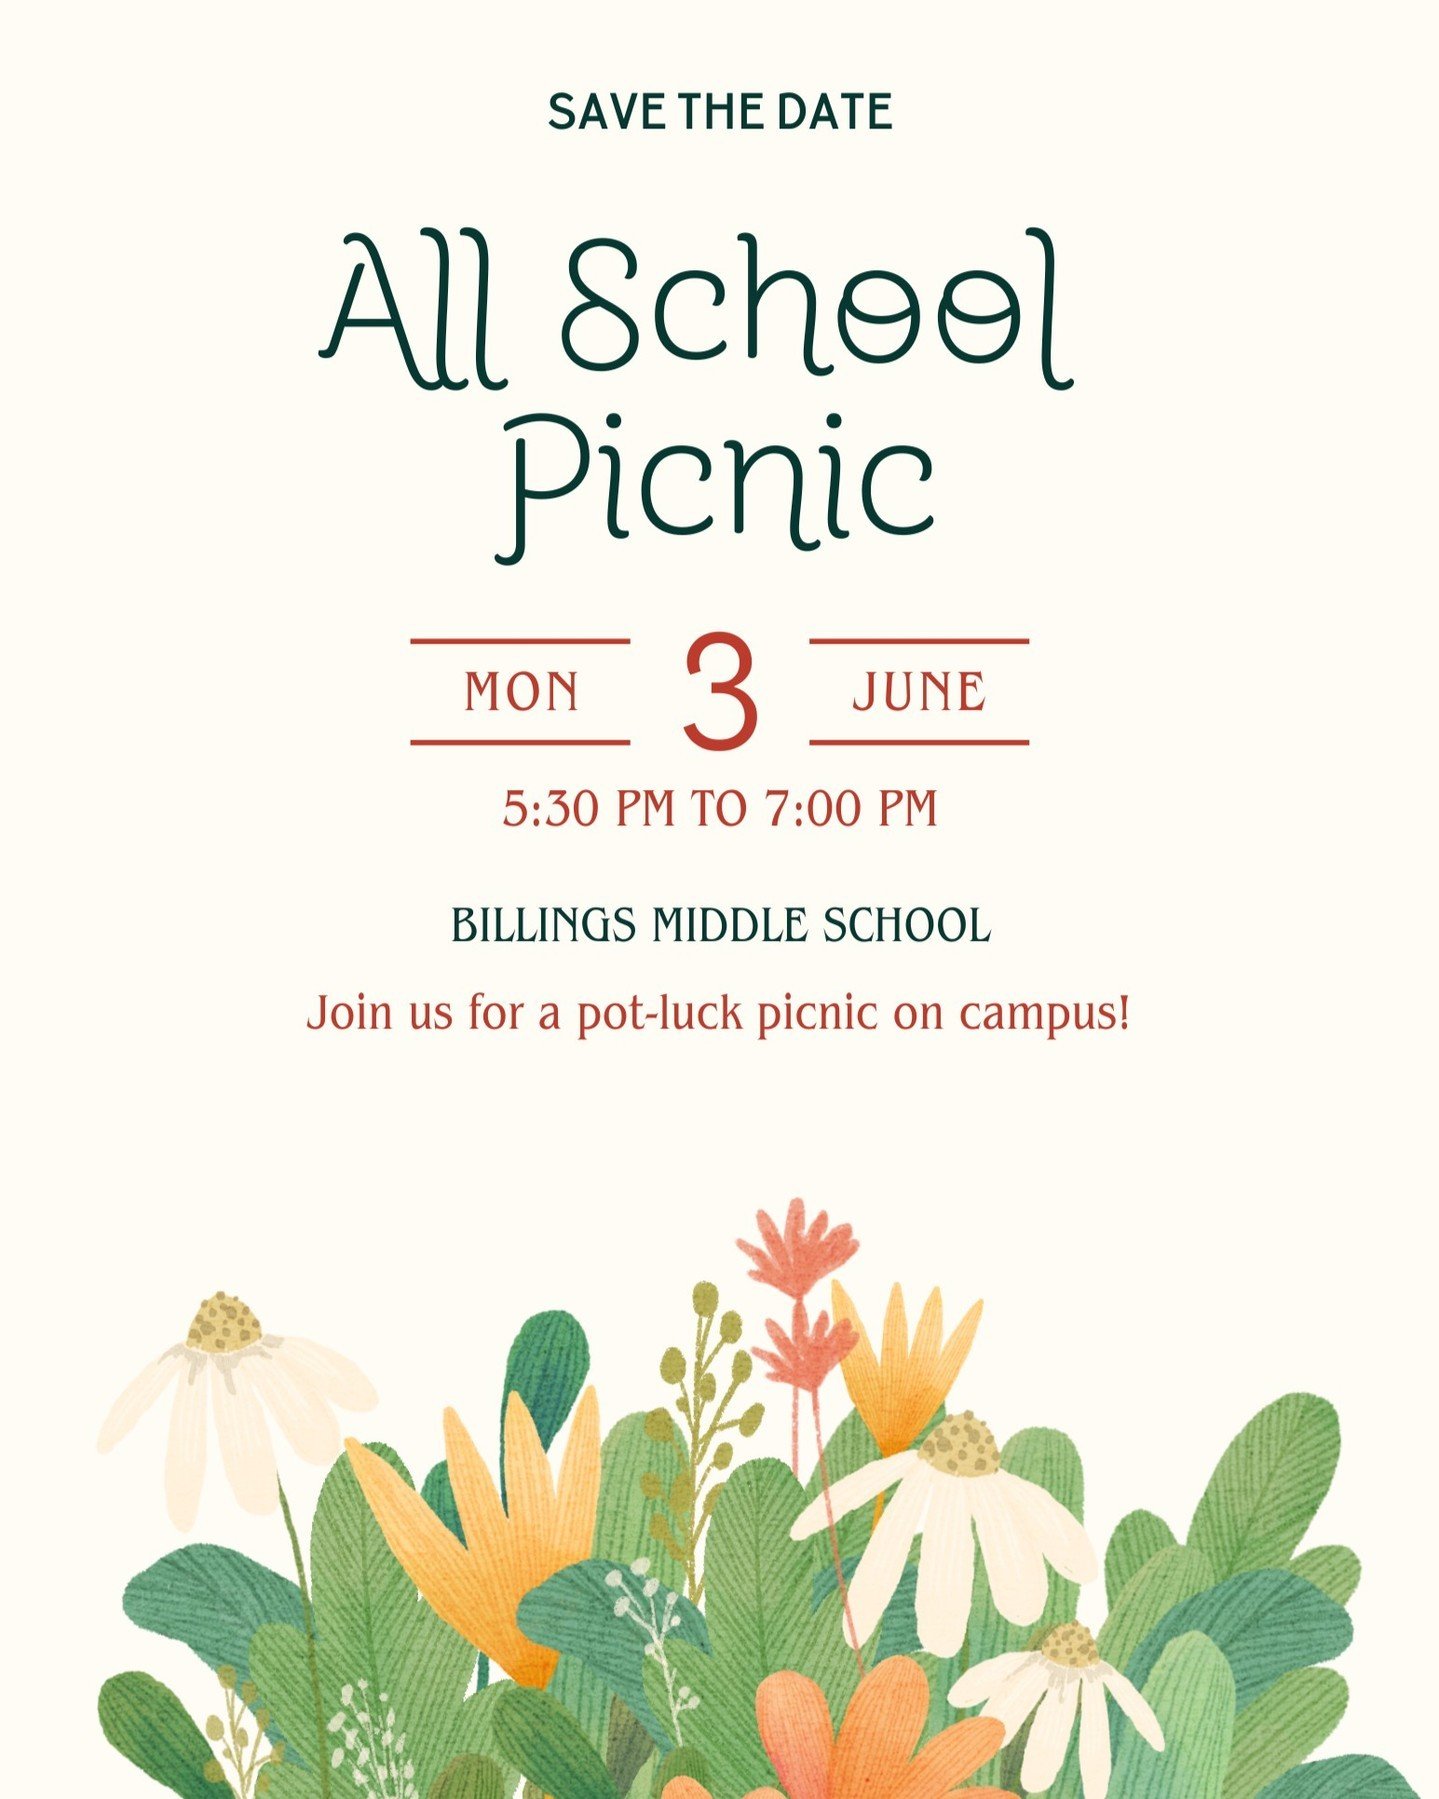 We hope to see all current and incoming families Monday, June 3rd, for our on-campus All School Picnic!  Stay tuned for more info on the potluck portion. #BillingsMiddleSchool